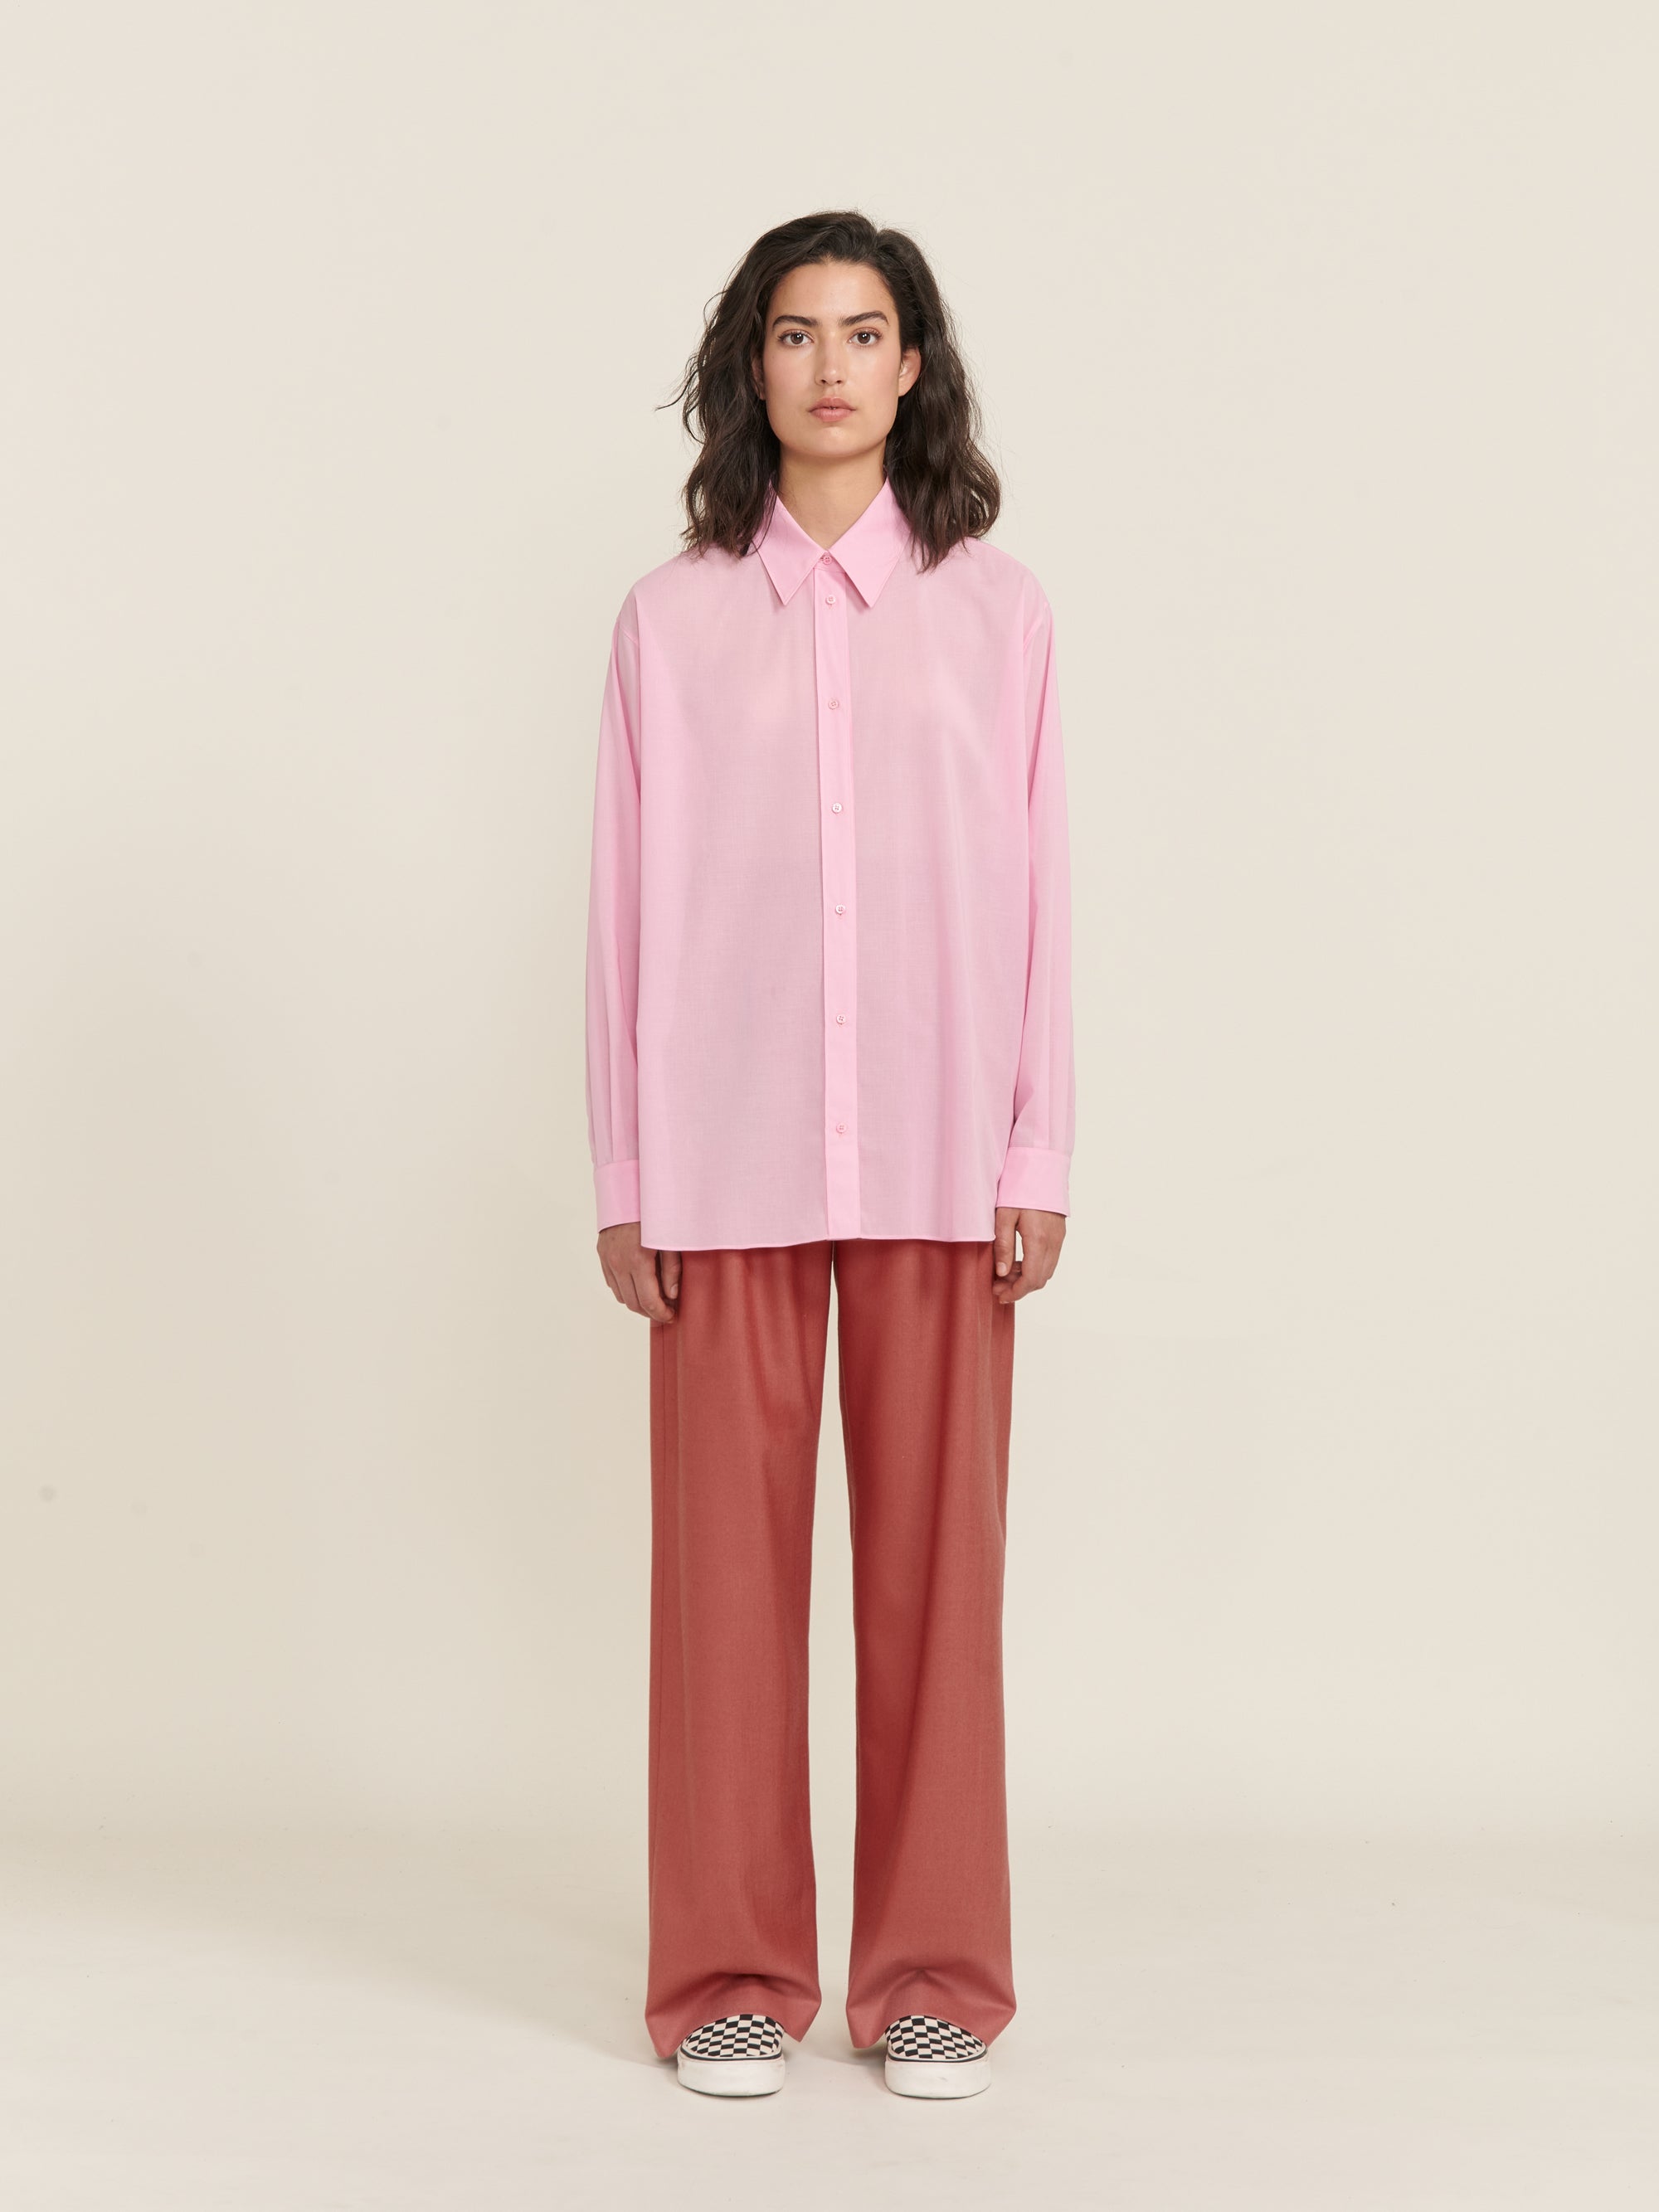 P168_FLANELLE_PINK_044